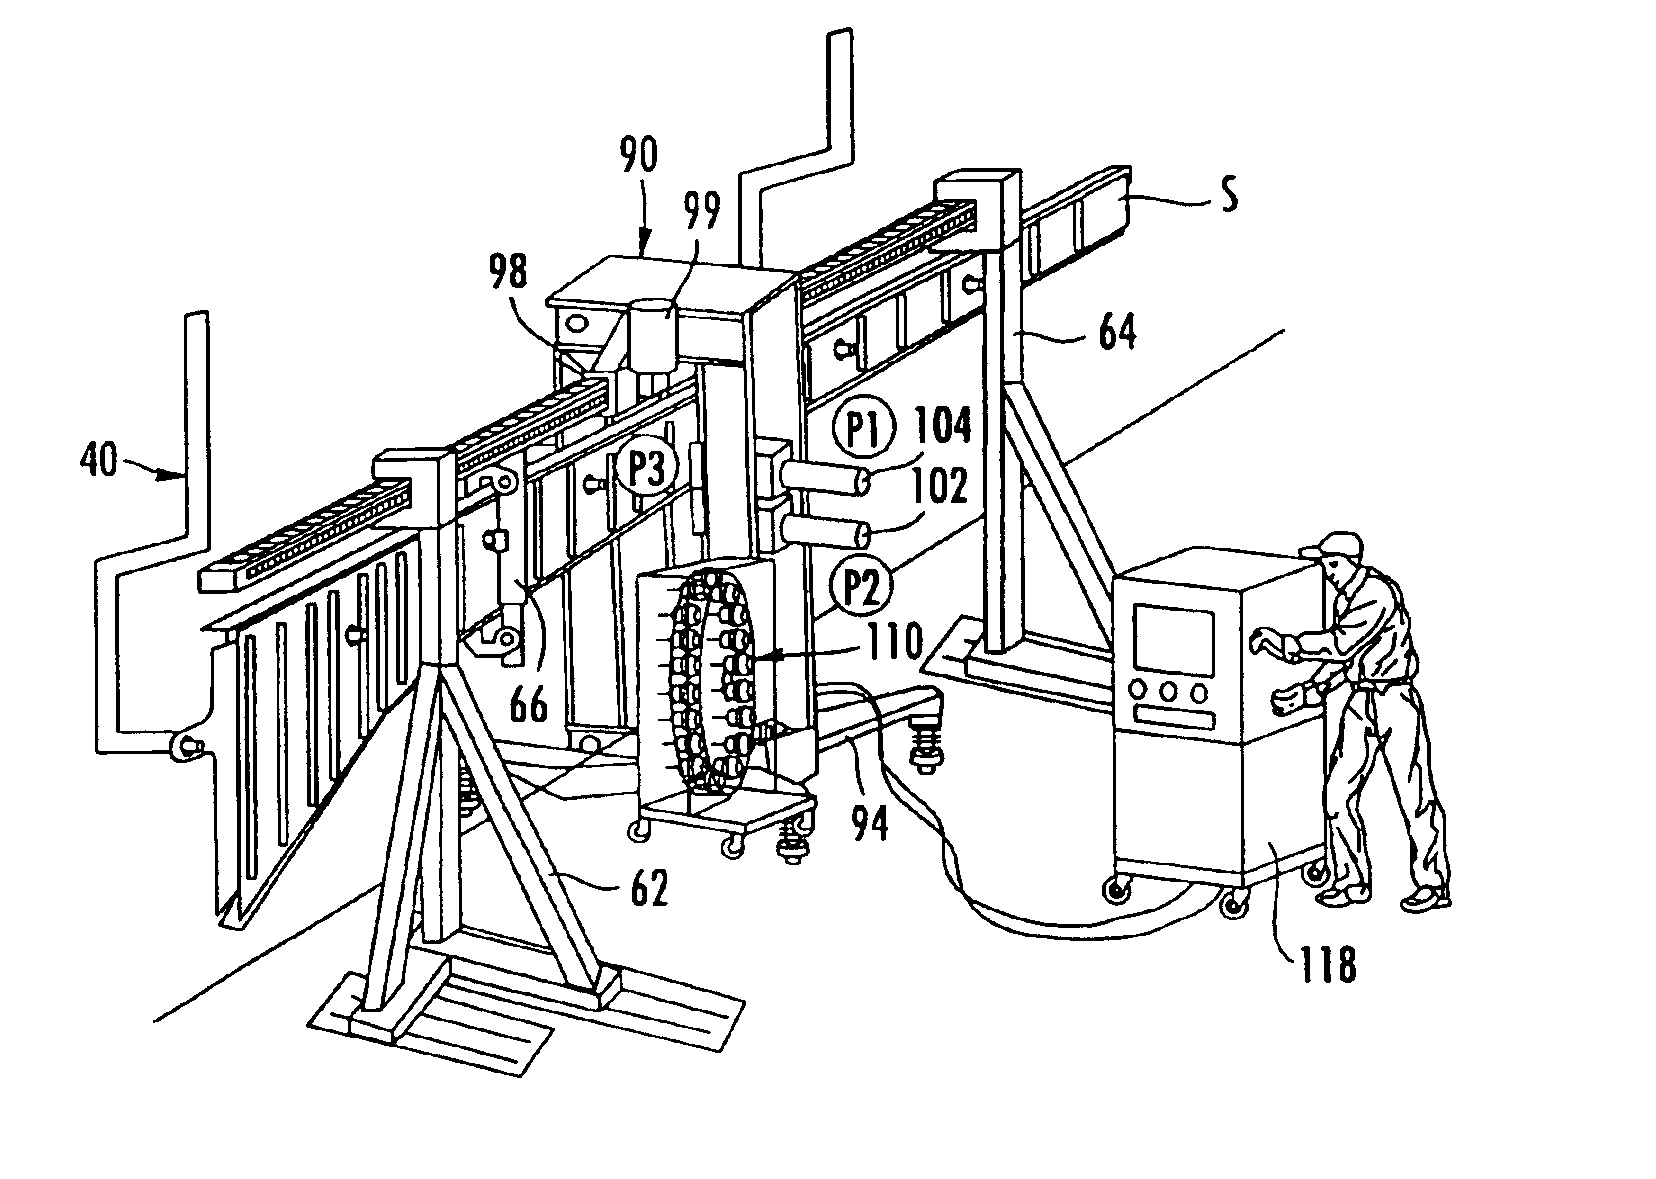 Manufacturing system for aircraft structures and other large structures